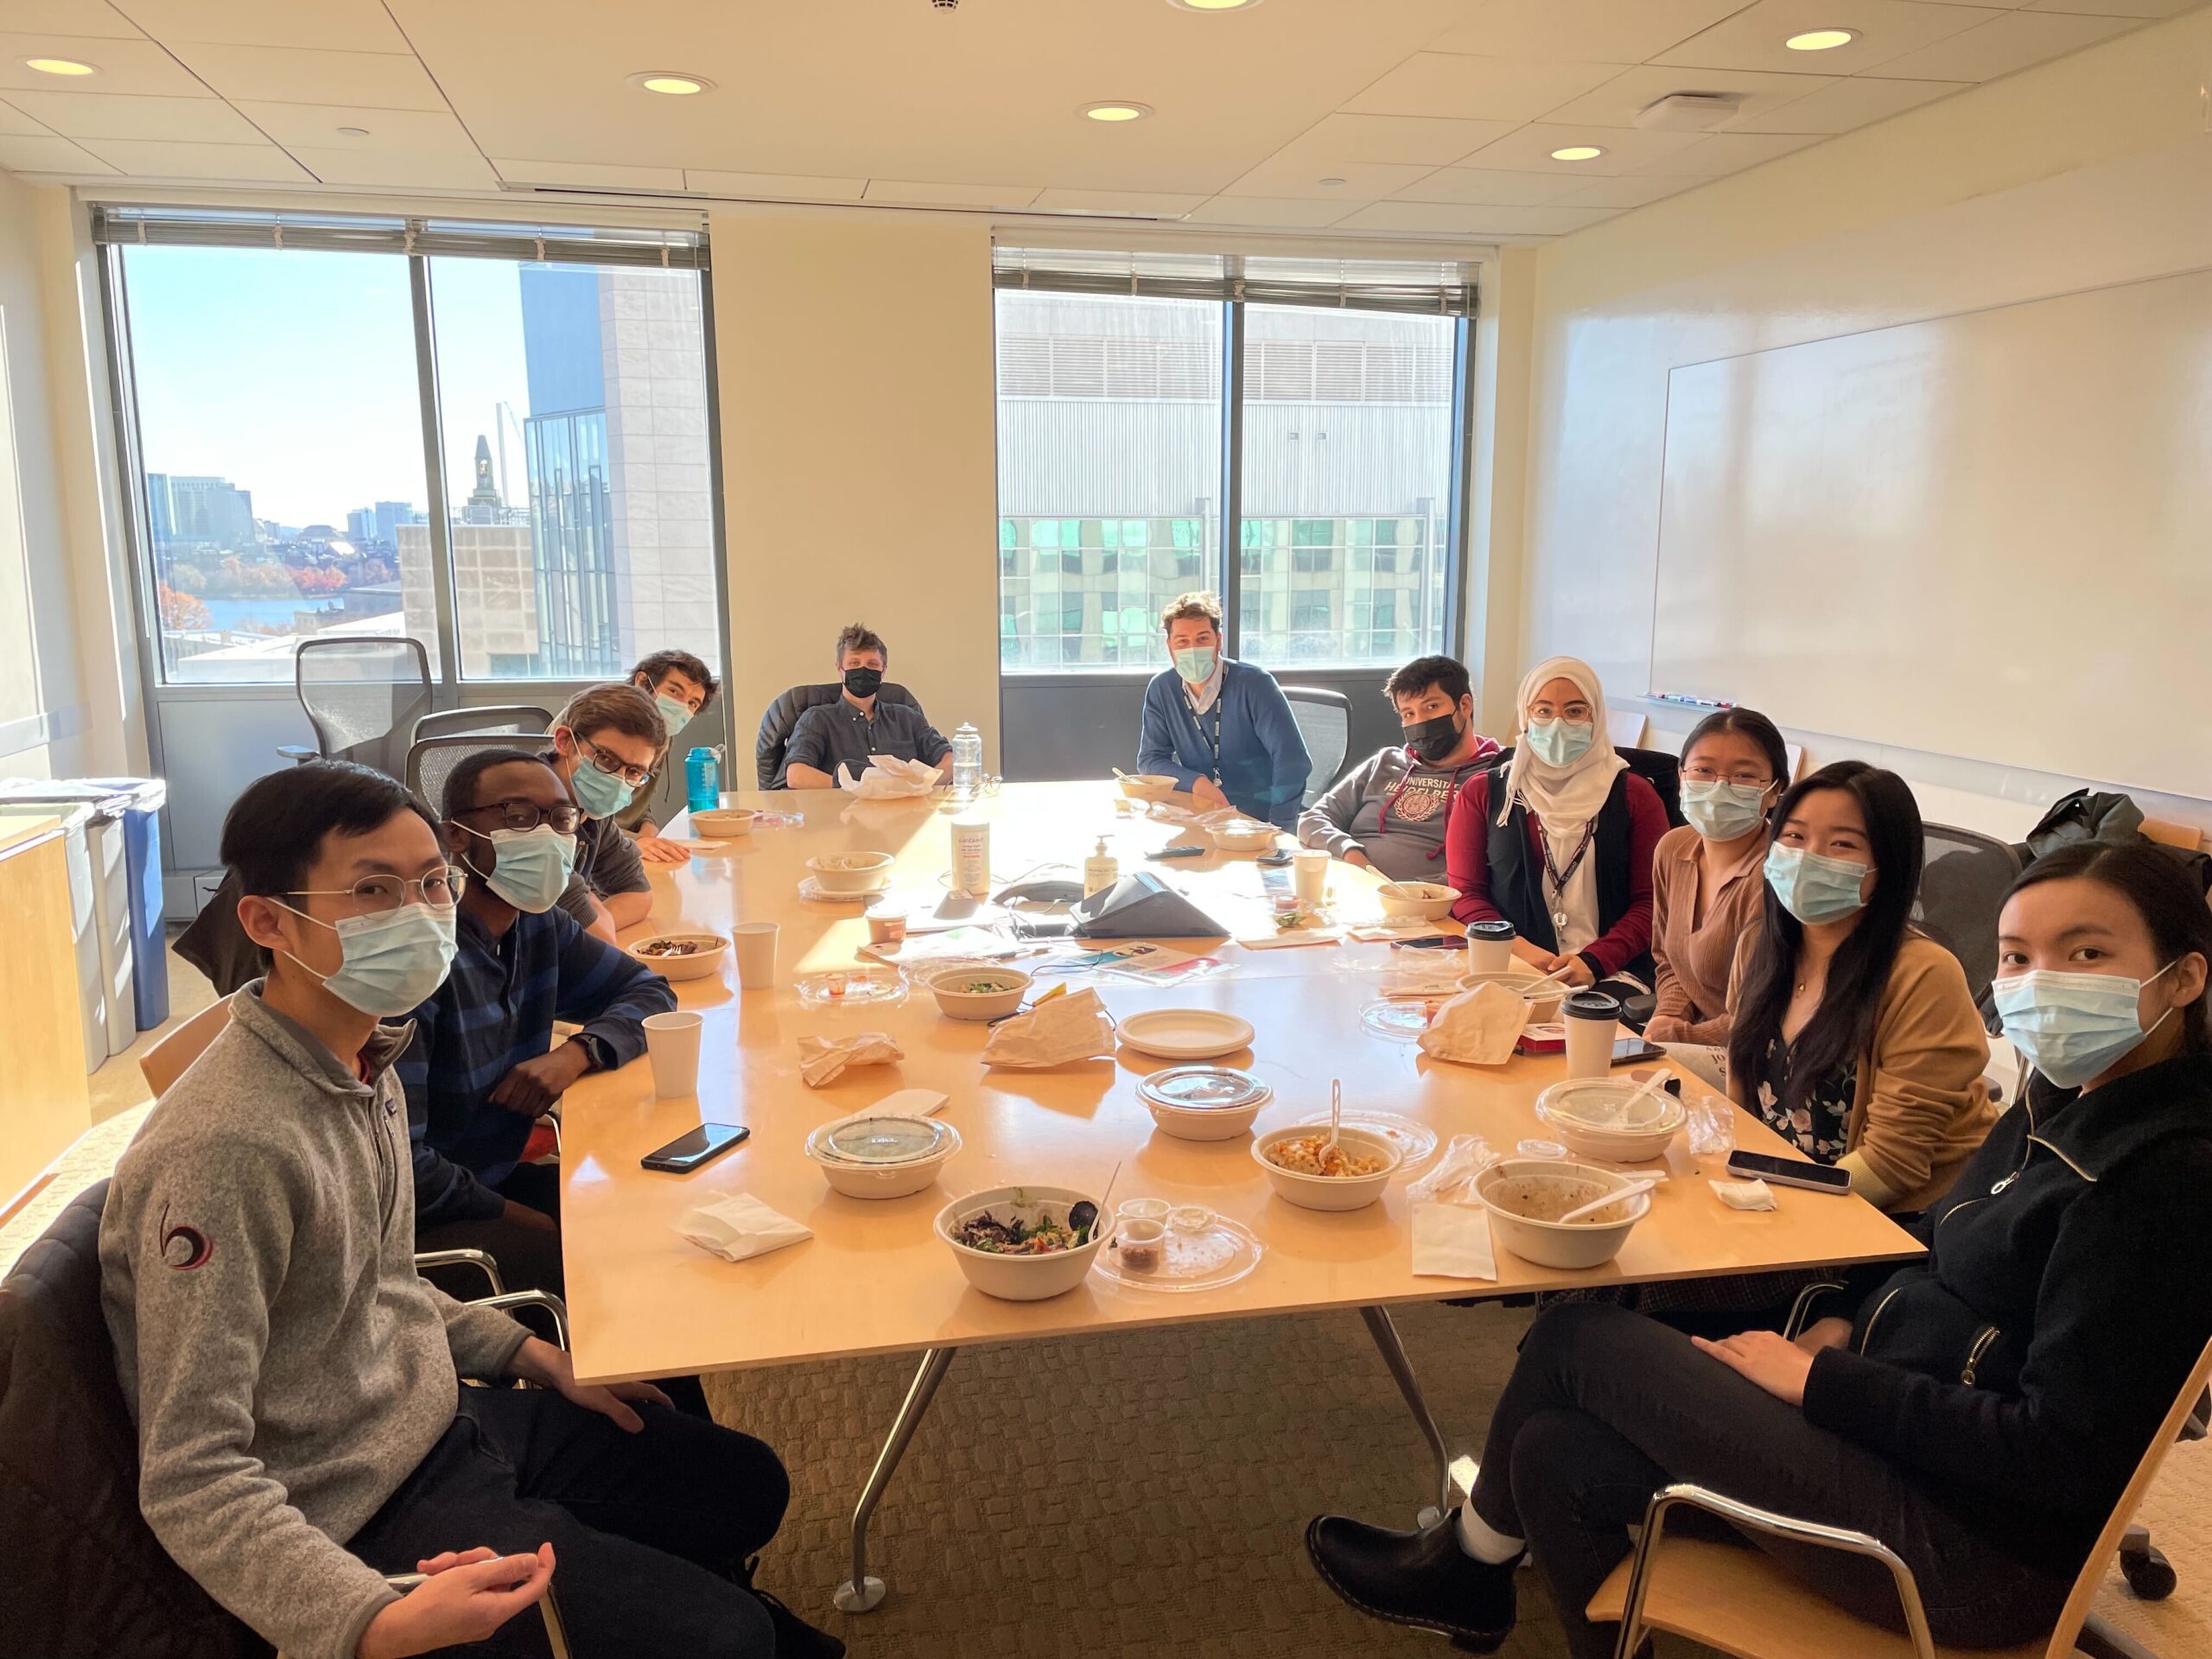 Lab members enjoying lunch together.